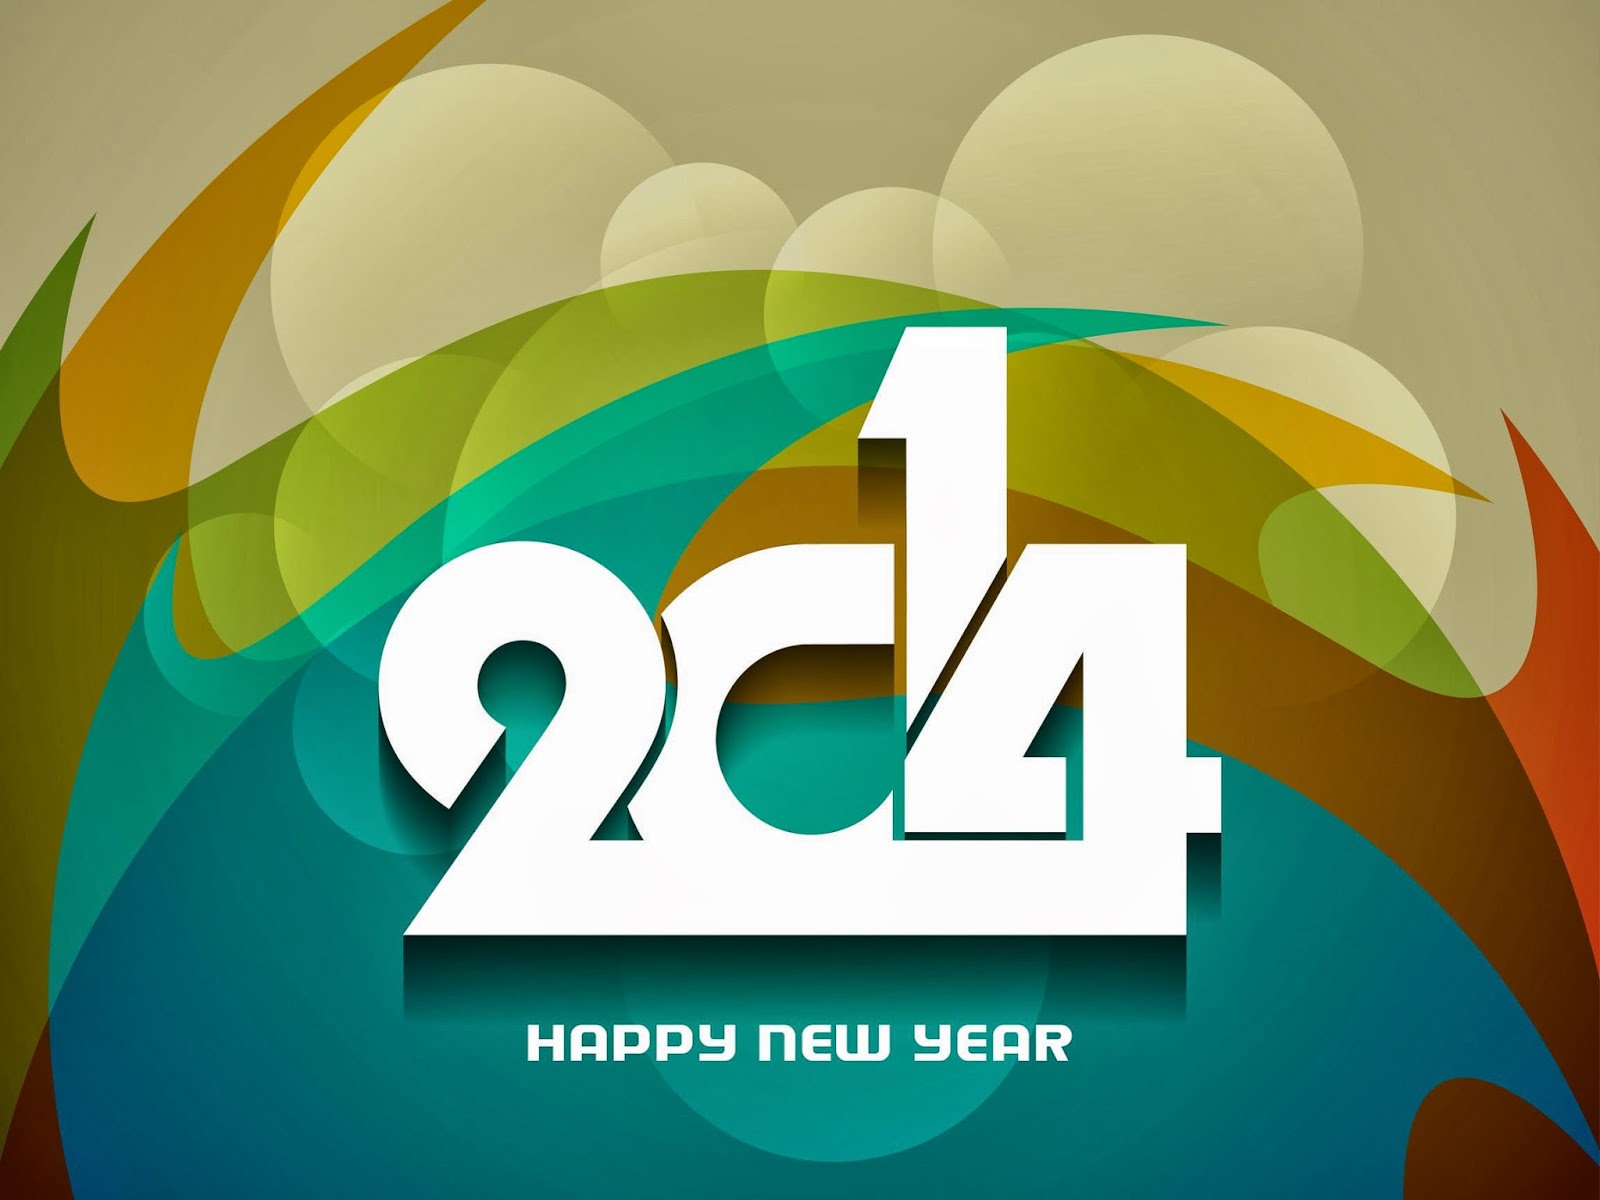 clipart of happy new year 2014 - photo #27